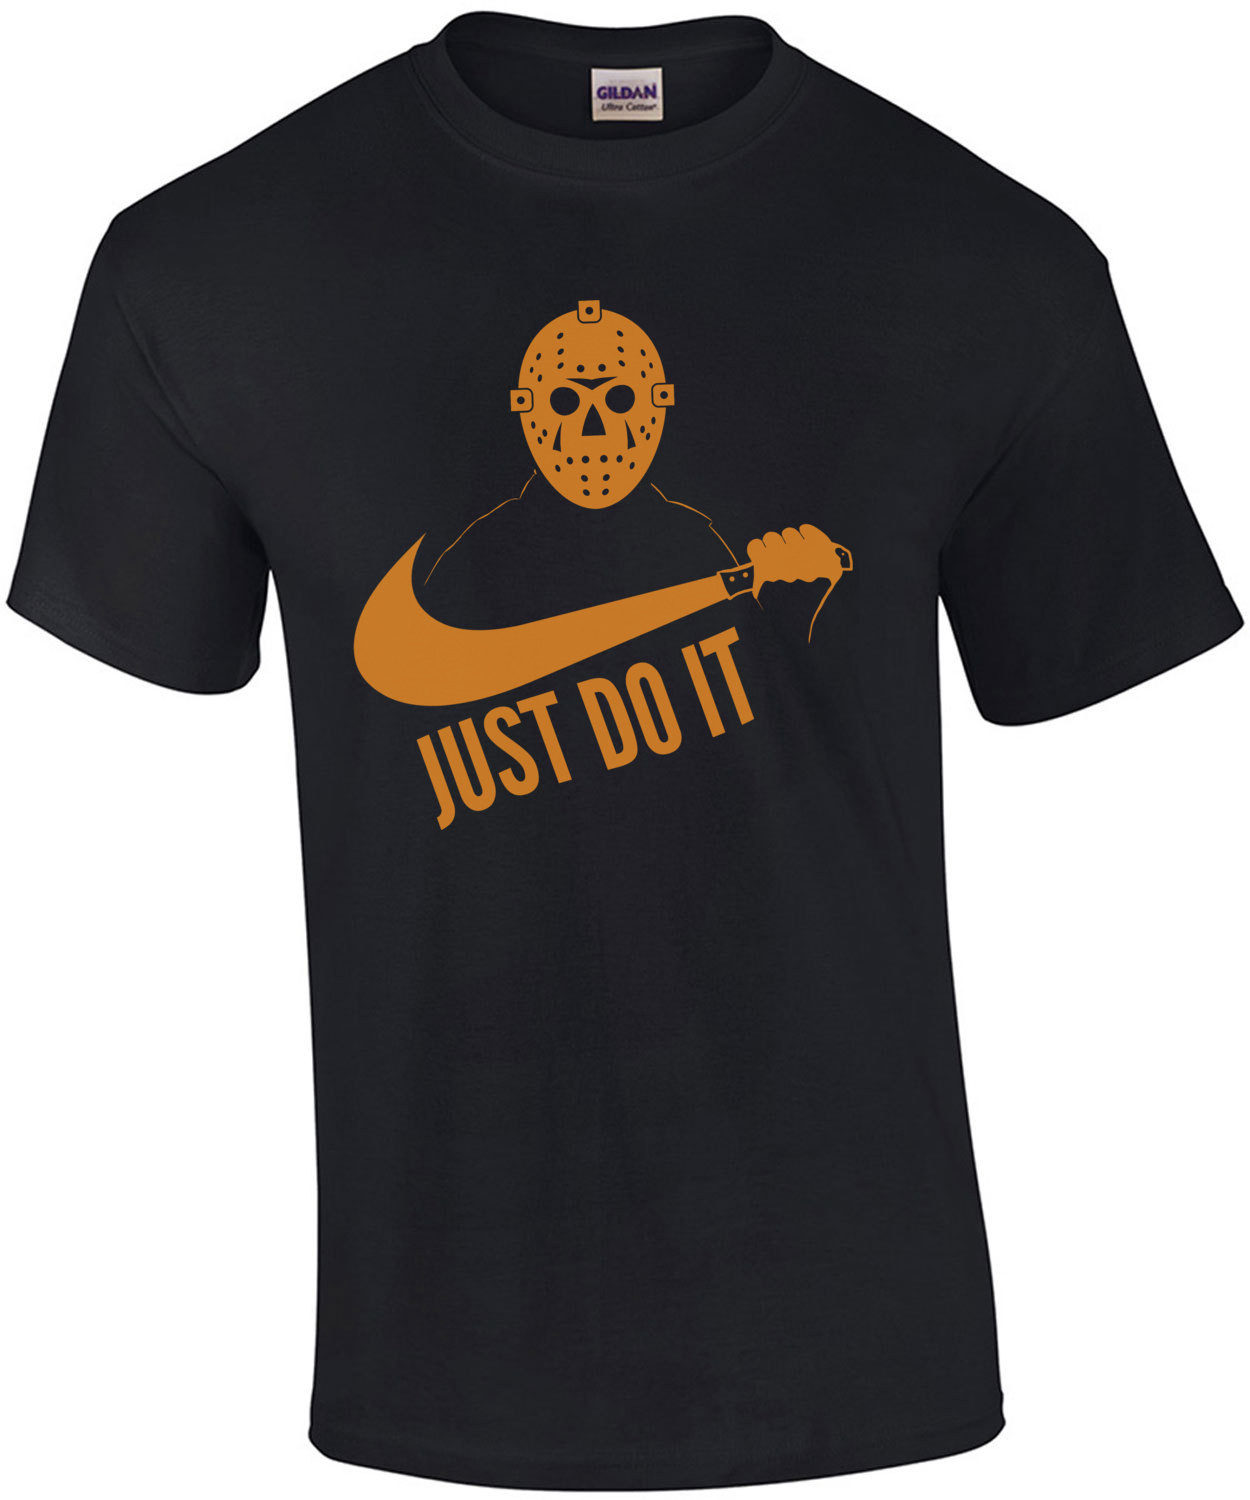 Just Do It - Jason Voorhees - Friday The 13th Nike Parody Shirt